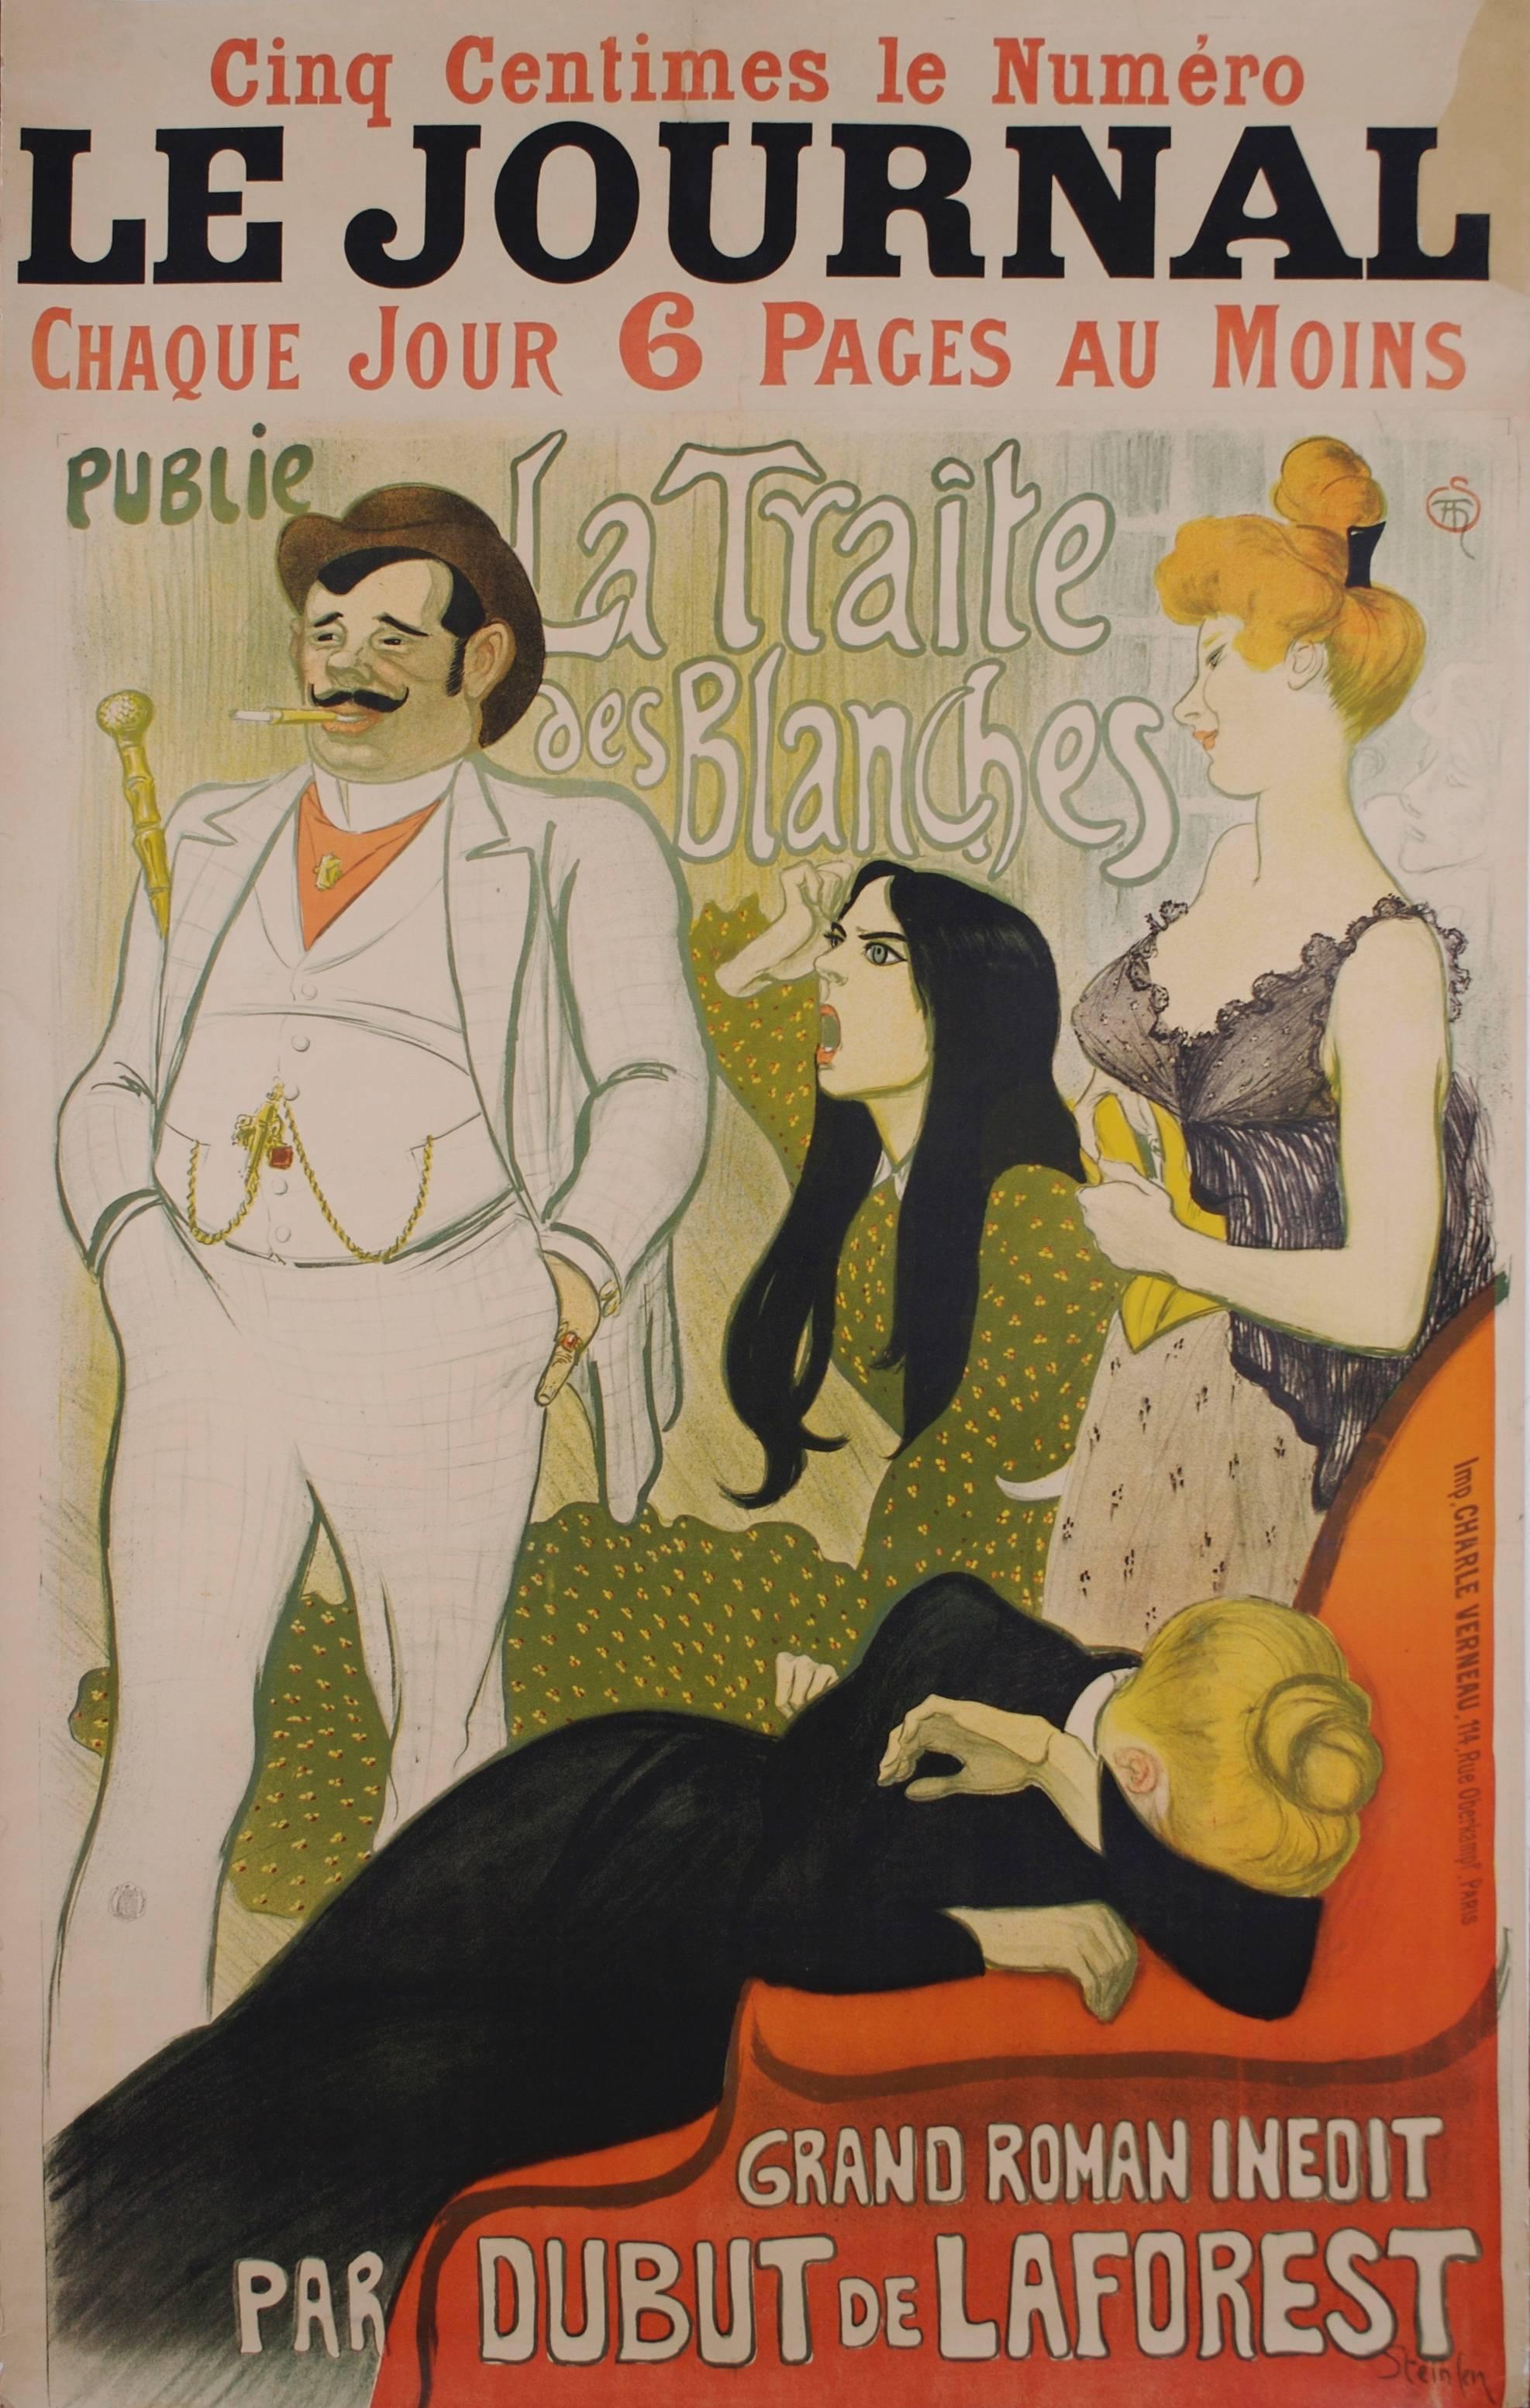 Original French Turn of the Century Poster by Theophile Steinlen, c. 1890s - Print by Théophile Alexandre Steinlen